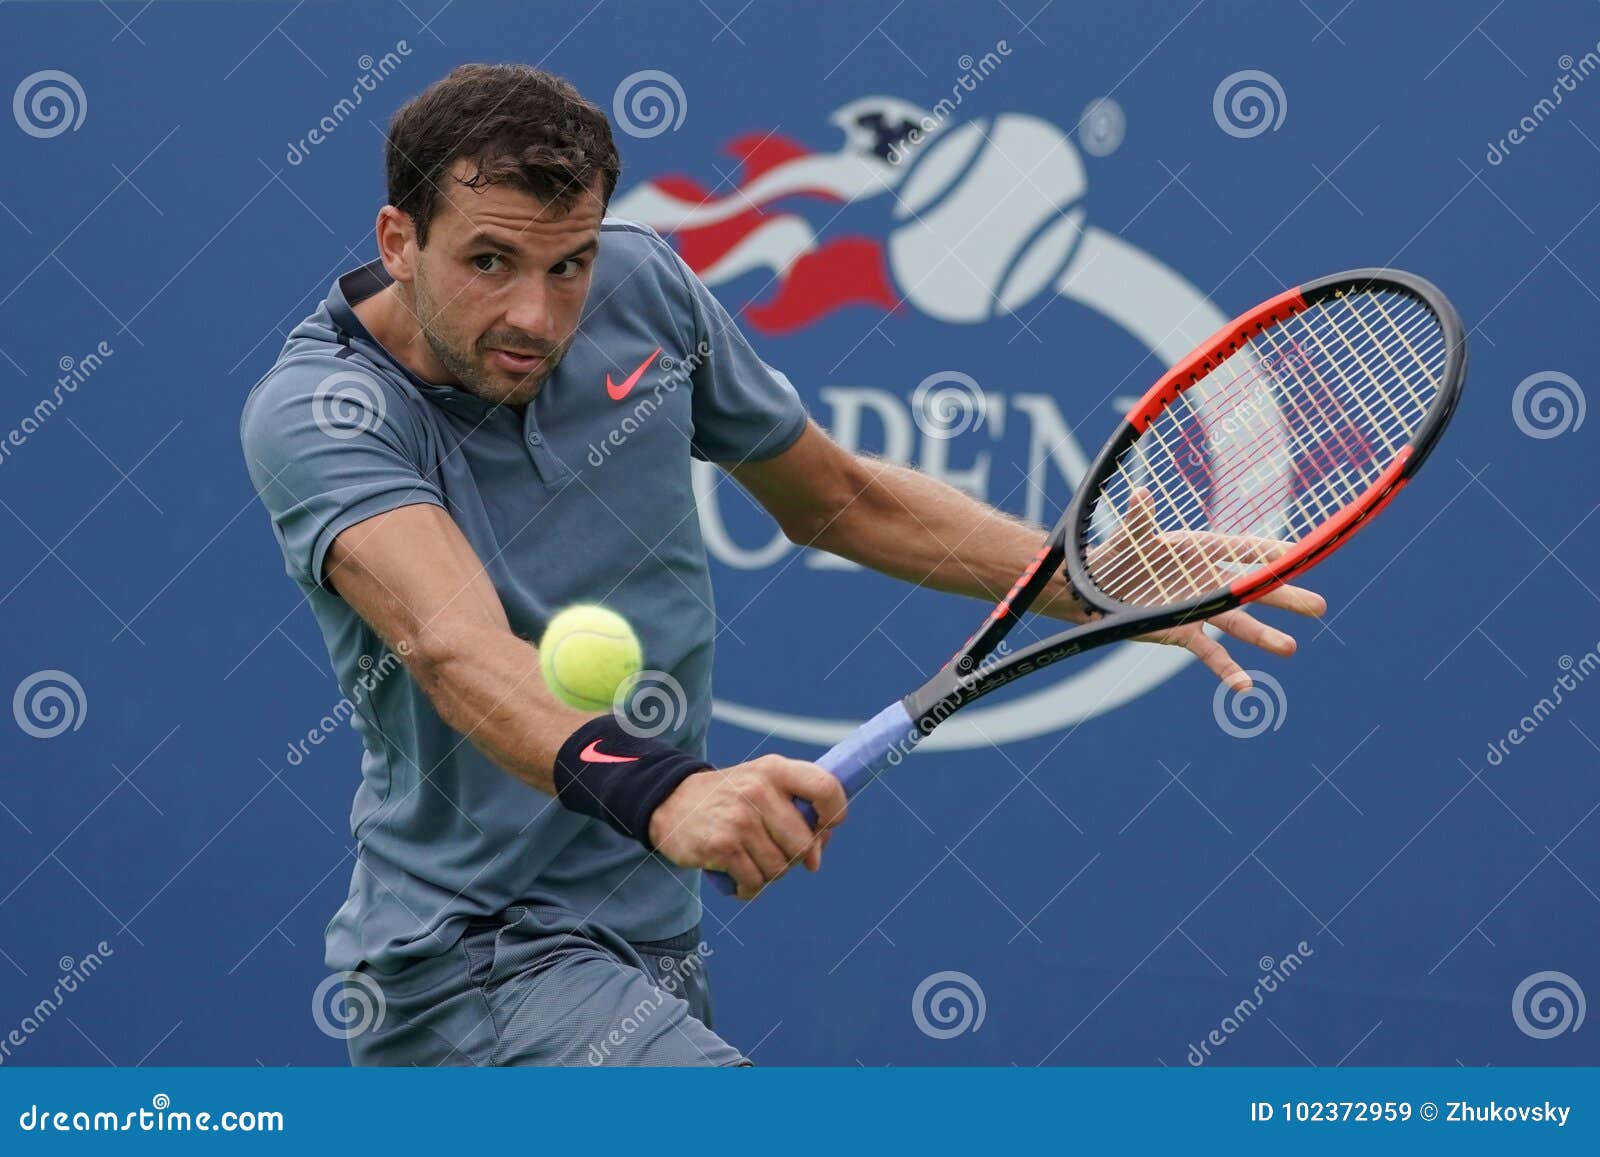 NEW YORK - AUGUST 31, 2017: Professional tennis player Grigor Dimitrov of Bulgaria in action during his US Open 2017 second round match at Billie Jean King National Tennis Center